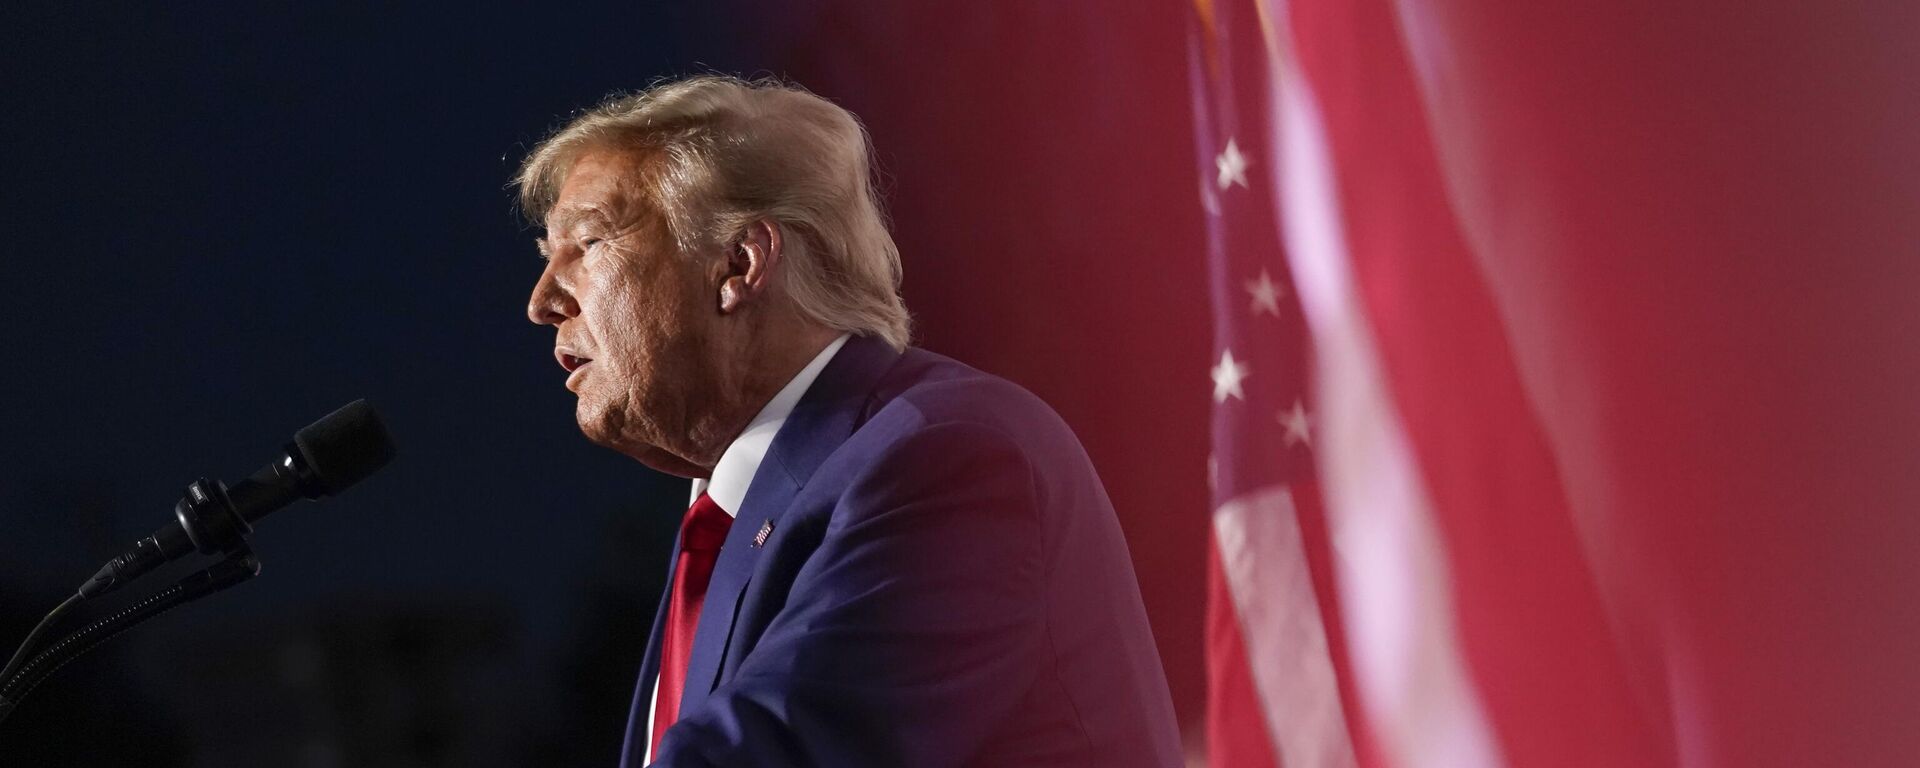 Former President Donald Trump speaks at Trump National Golf Club in Bedminster, N.J., Tuesday, June 13, 2023, after pleading not guilty in a Miami courtroom earlier in the day to dozens of felony counts that he hoarded classified documents and refused government demands to give them back. - Sputnik International, 1920, 19.09.2023